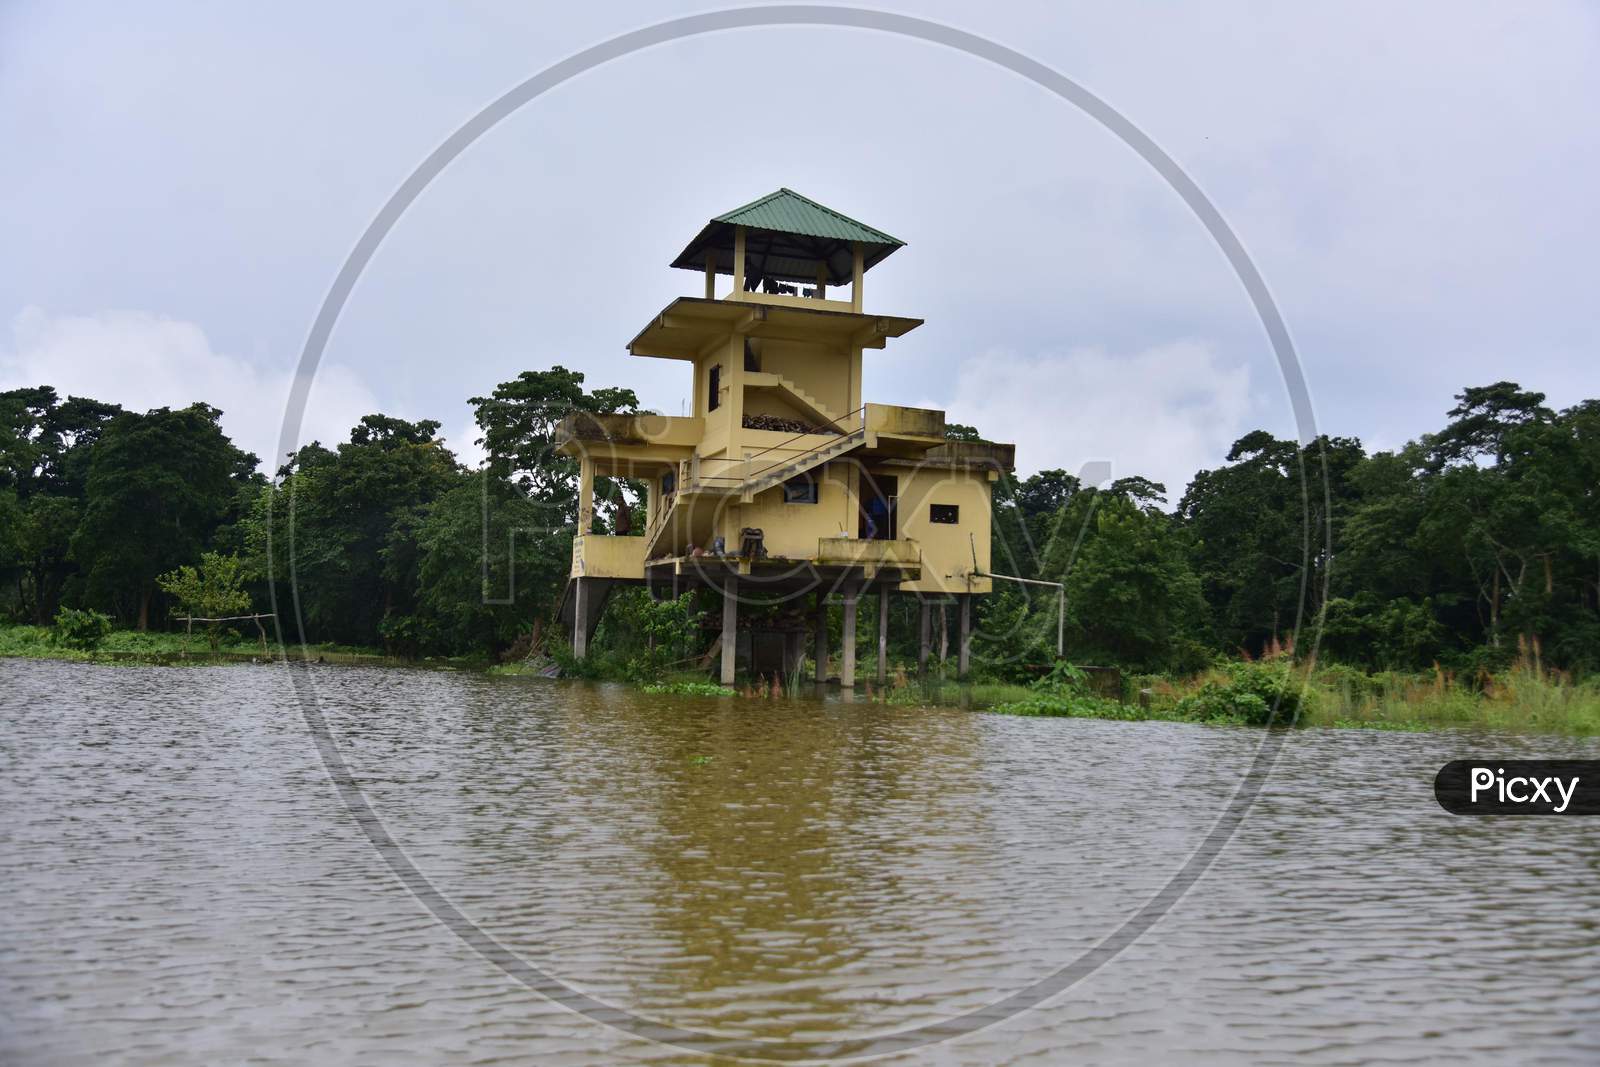 A Submerged Forest Camp In Flooded Kaziranga National Park In Nagaon District In The Northeastern State Of Assam on June 28,2020.